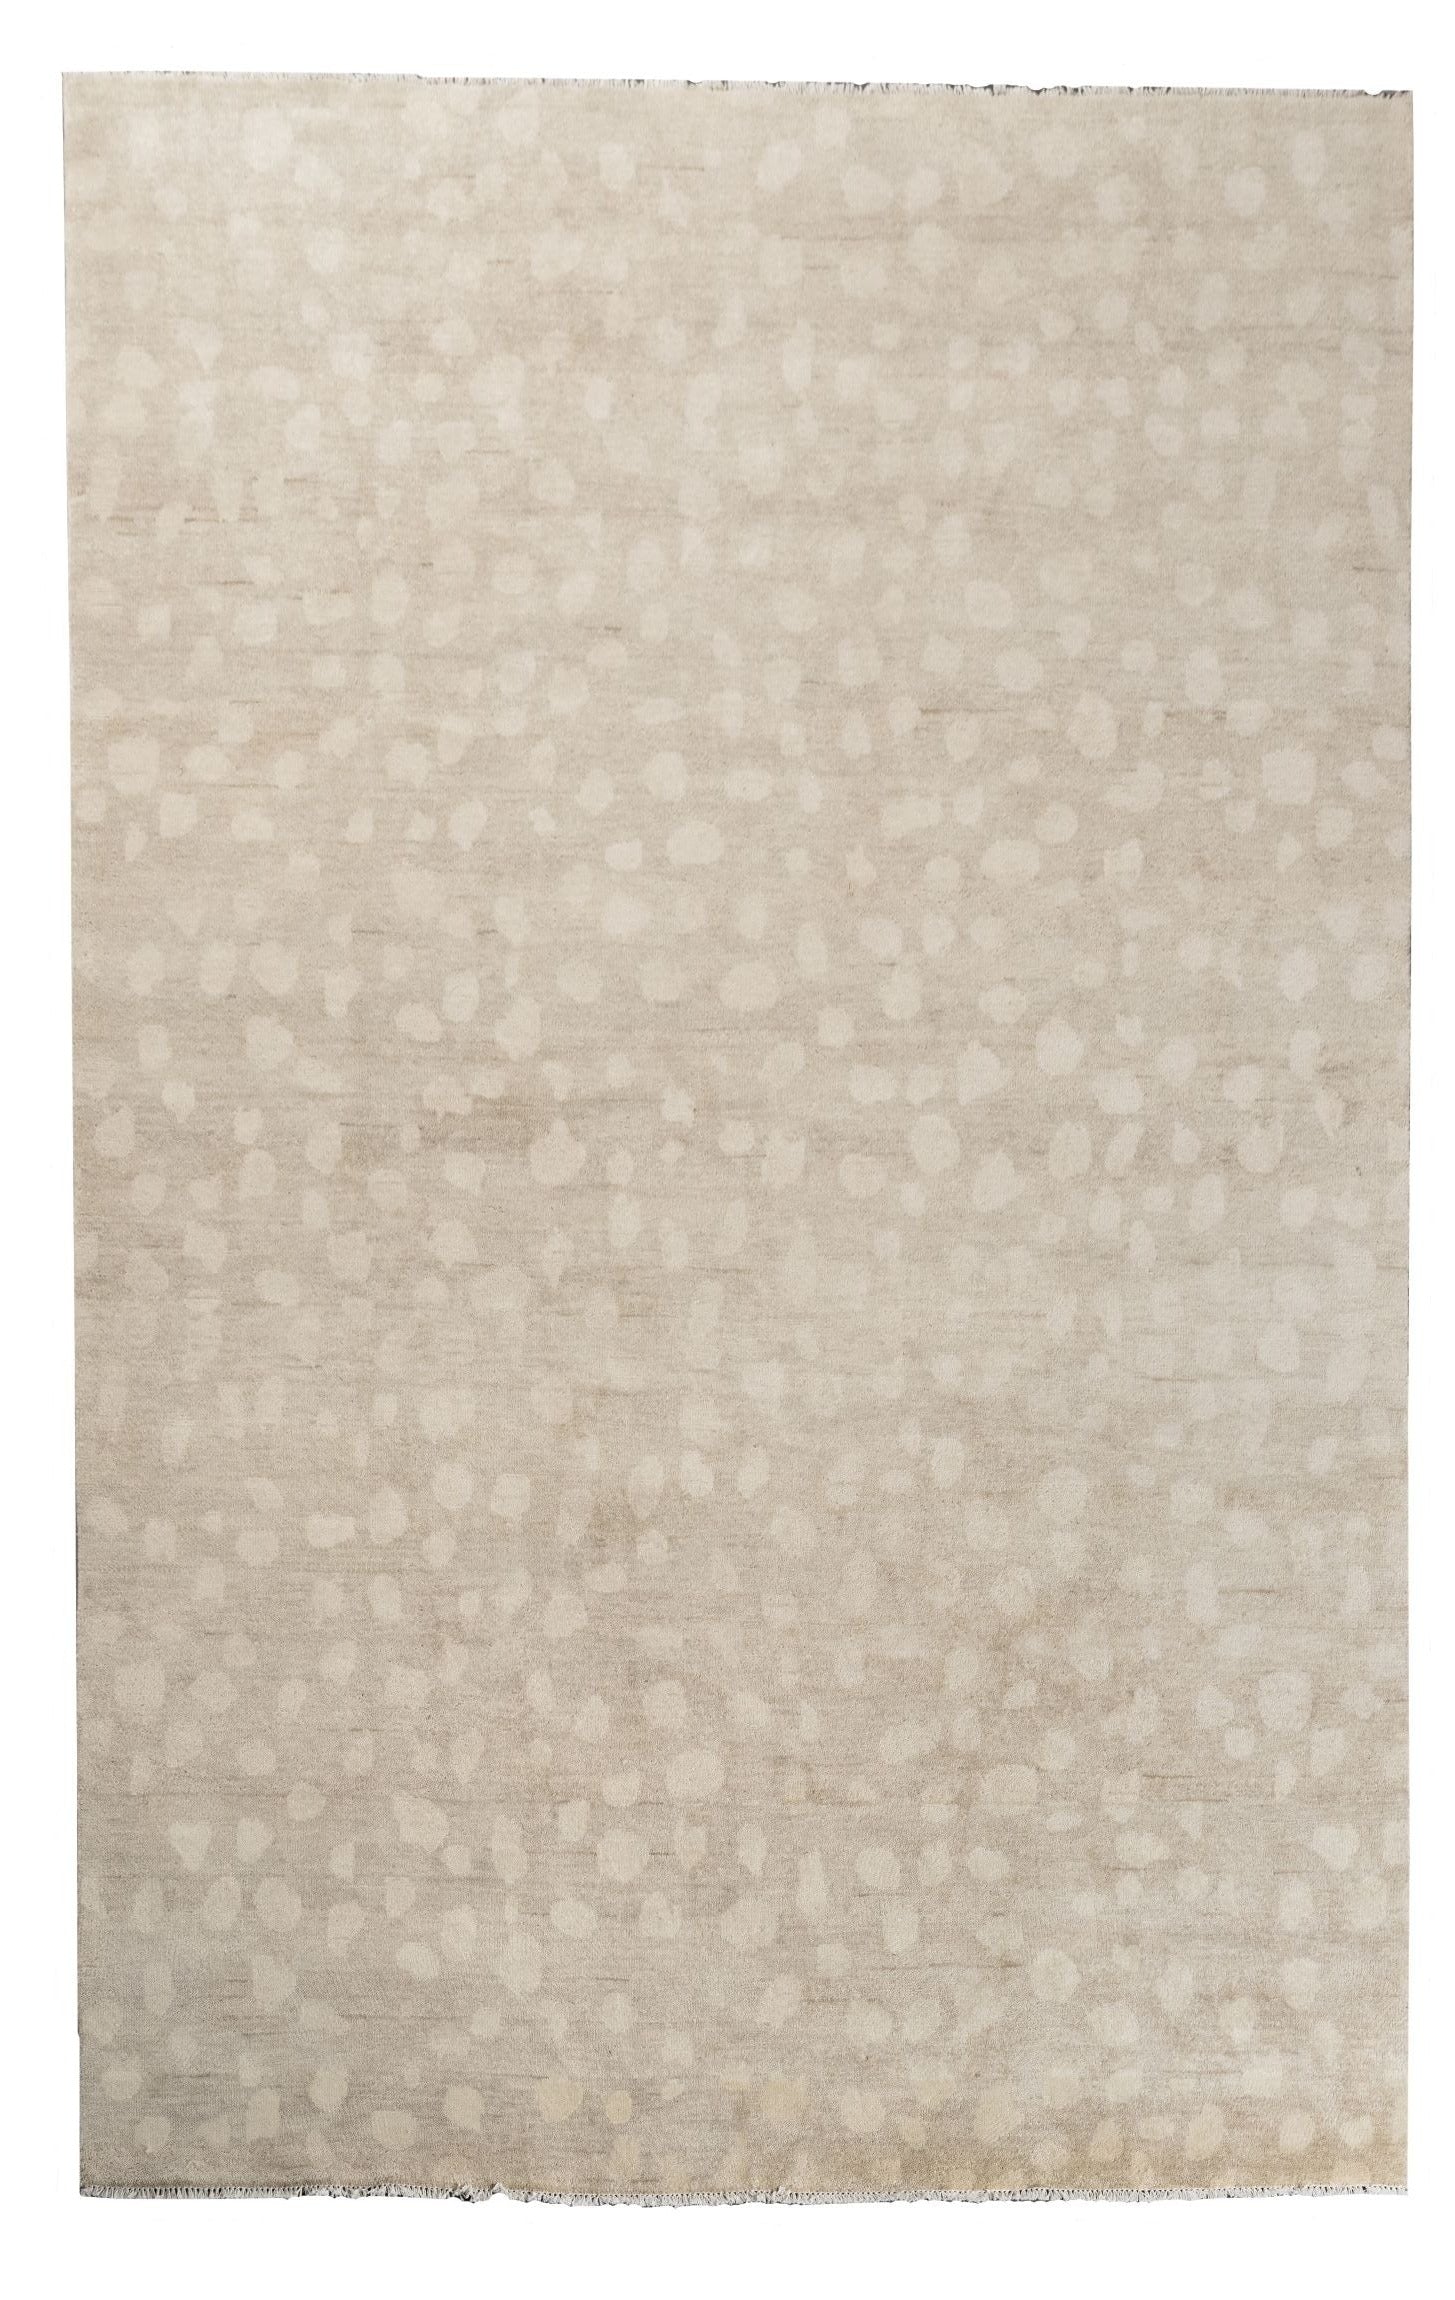 Neutral toned and hand-knotted Oushak style rug made of 100% New Zealand wool. This rug has a unique spotted pattern with tan, taupe, beige, ivory, and brown colors. 